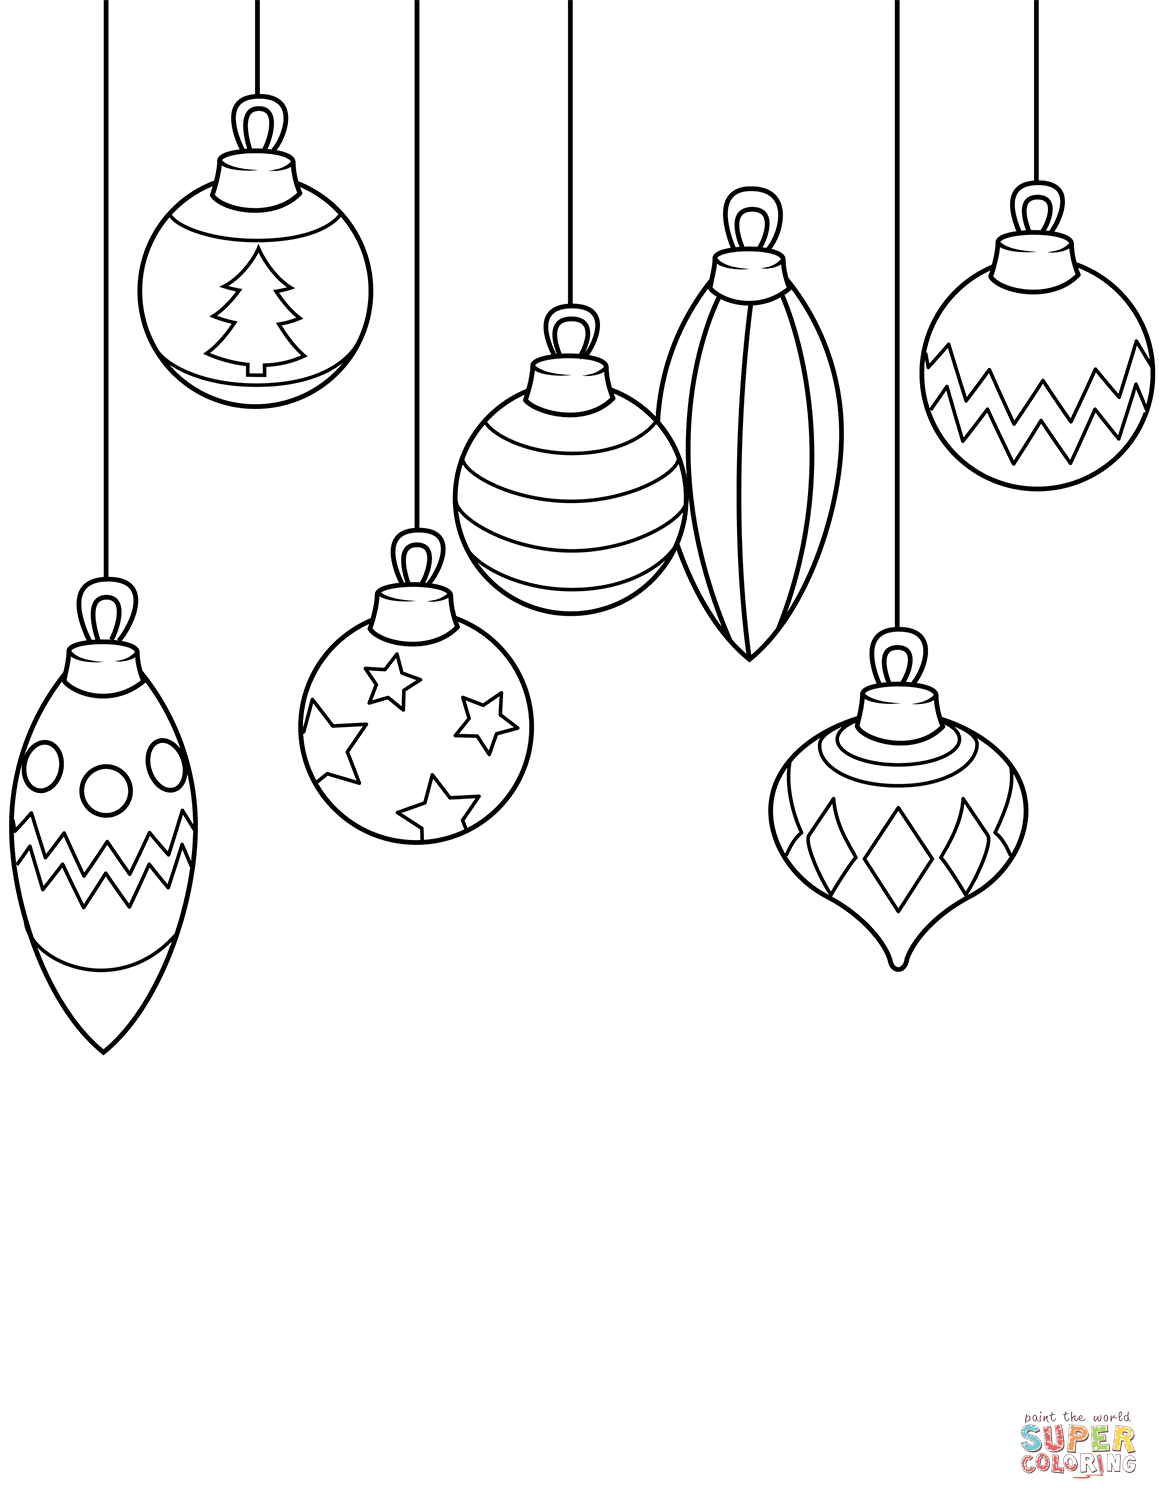 Christmas Ornaments Coloring Page | Free Printable Coloring Pages - Free Printable Christmas Ornament Coloring Pages